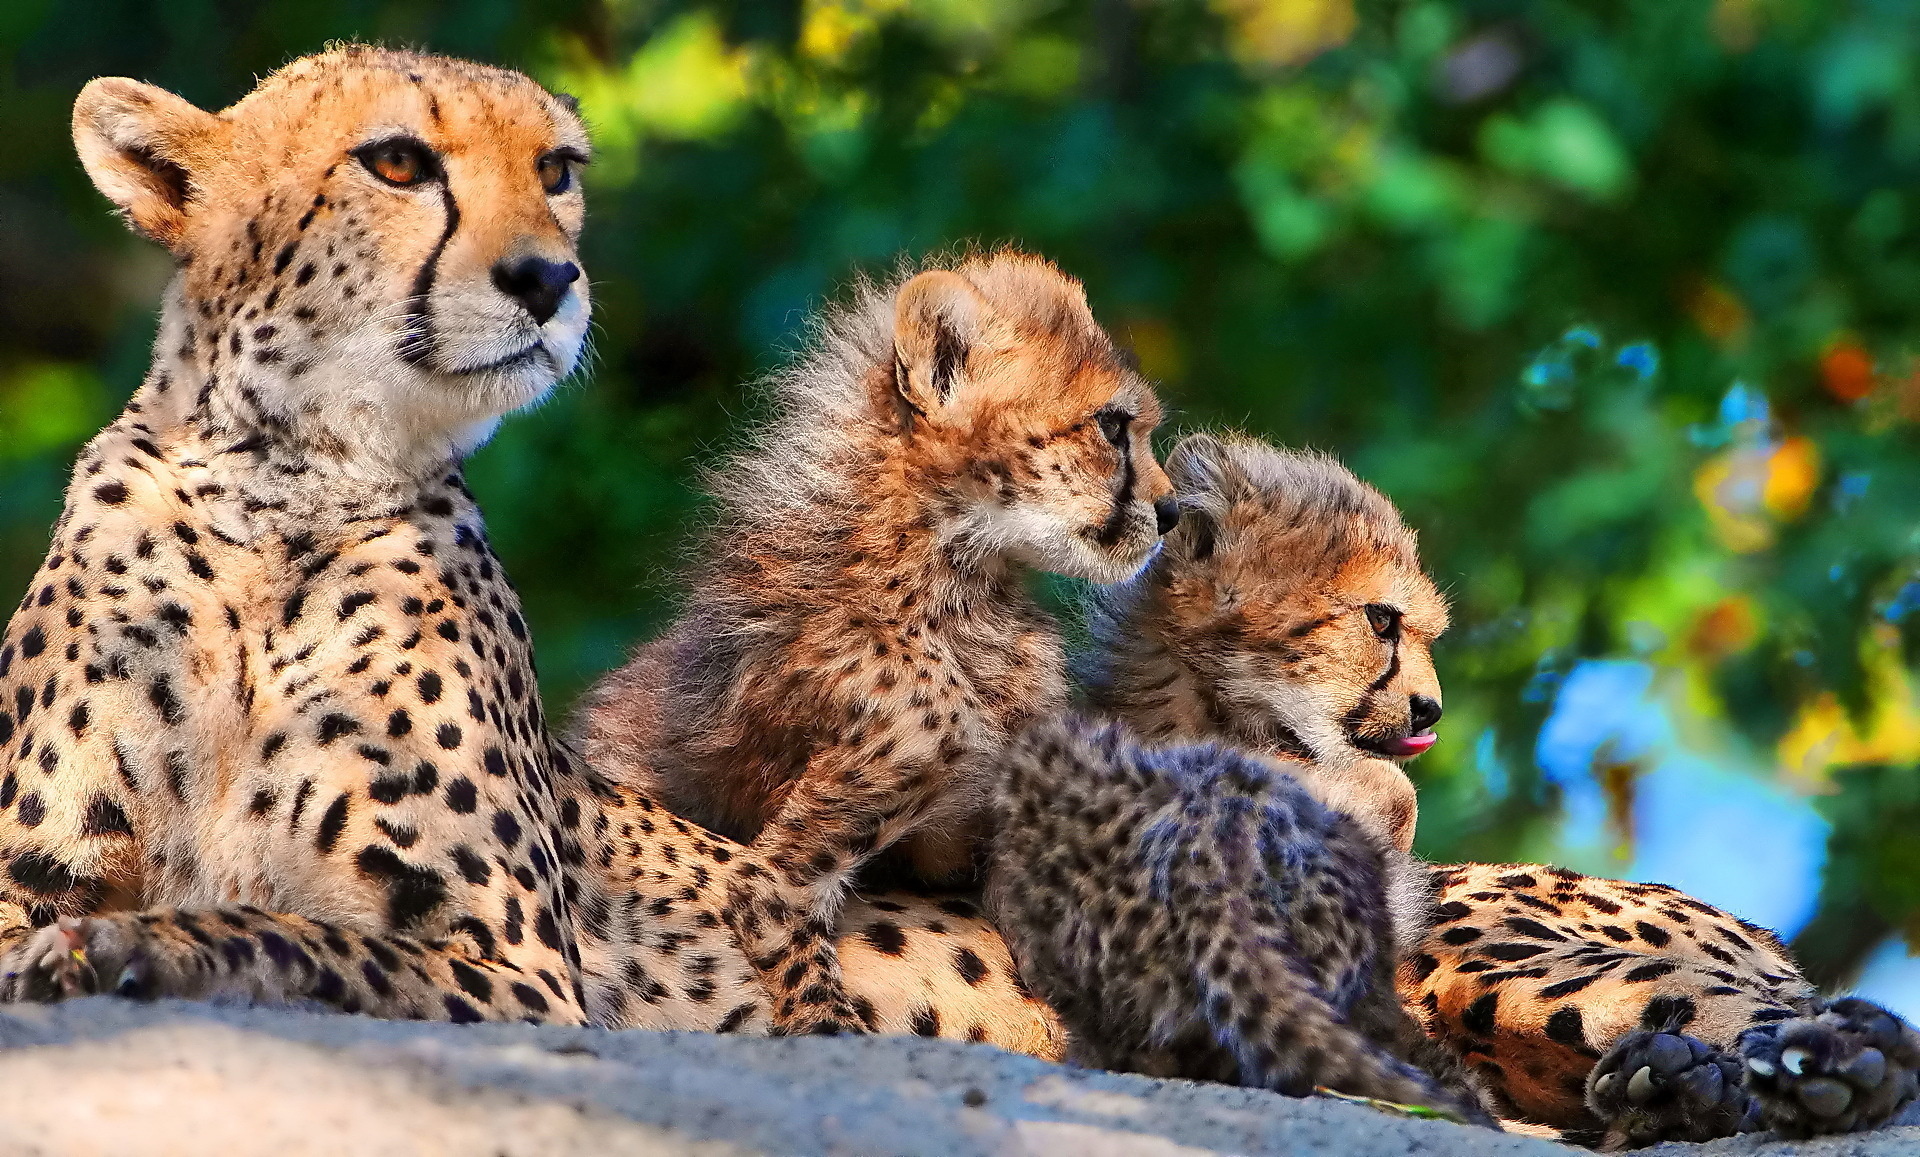 Cheetah Backgrounds free download | Wallpapers, Backgrounds ...